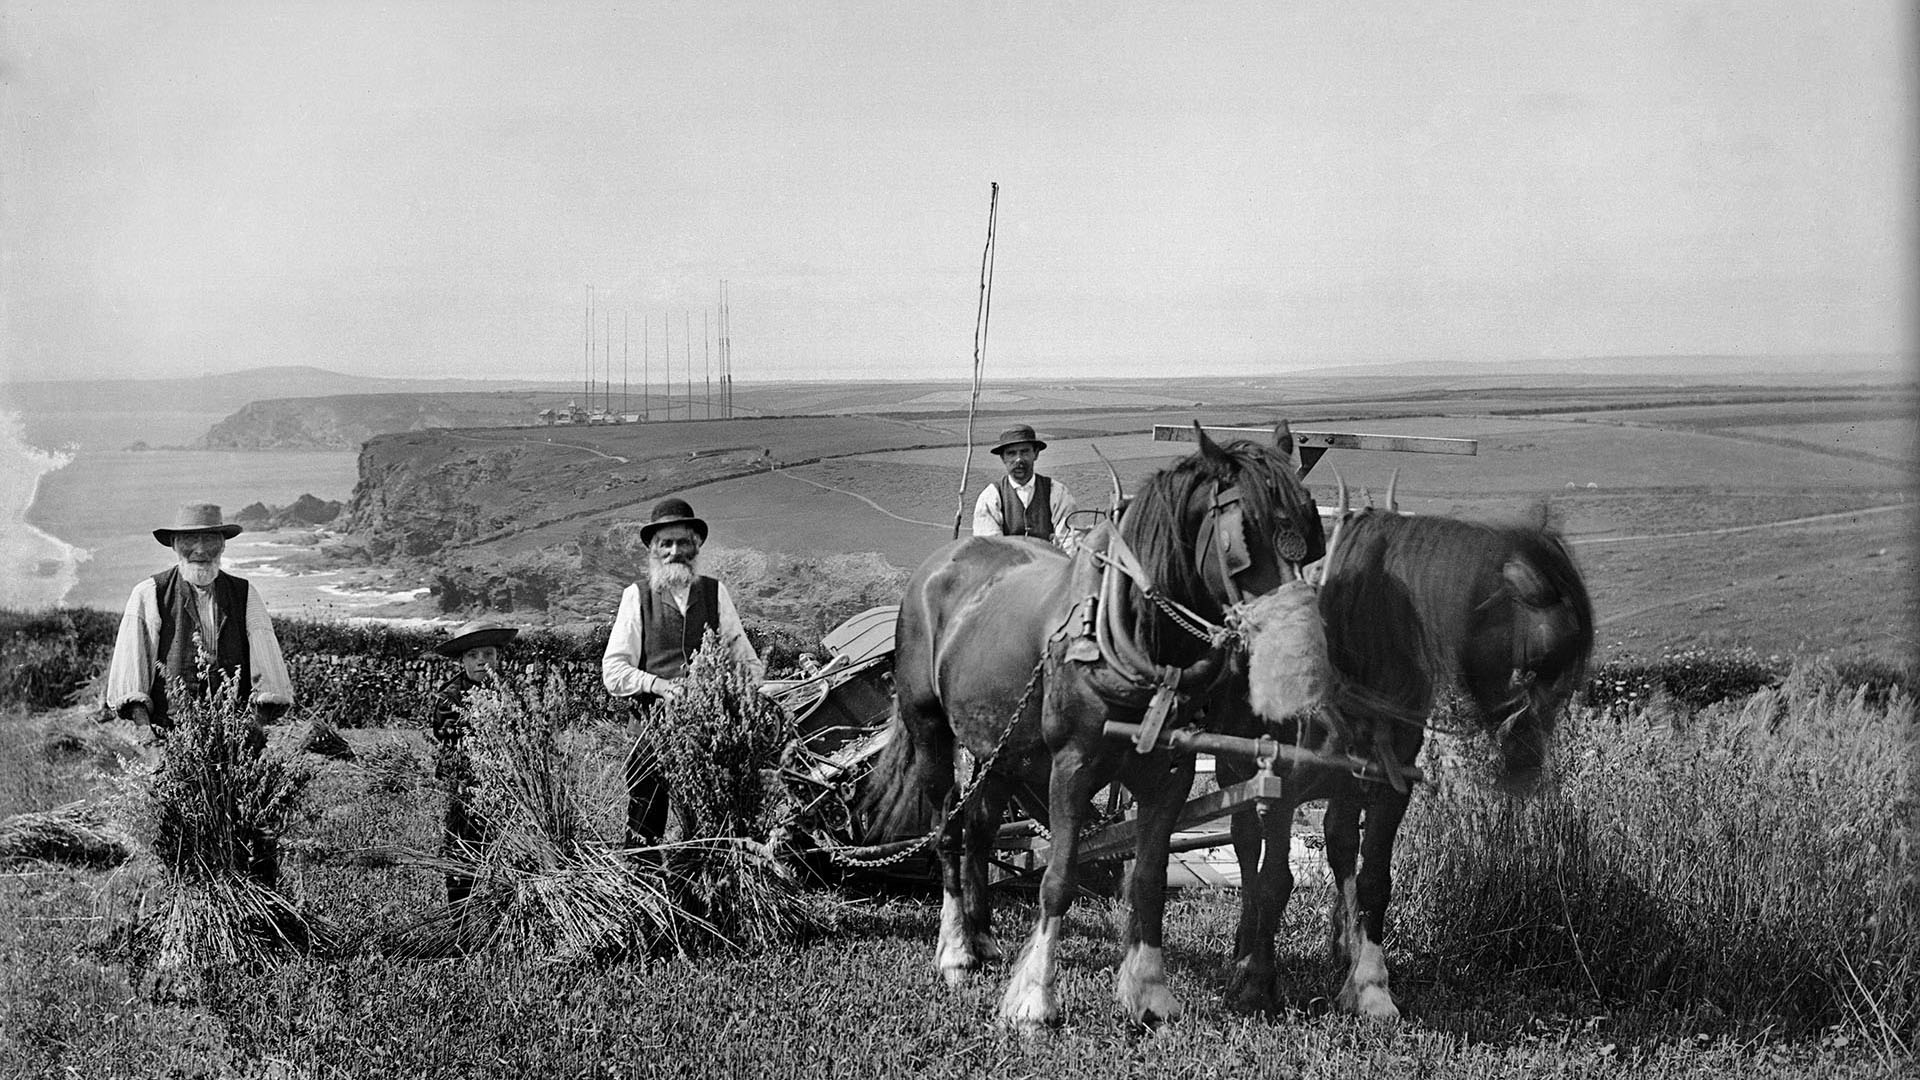 Black and white archive photograph of three farm workers and a horse drawn vehicle posing for the camera in a field, with radio masts, cliffs and coasts in the background.